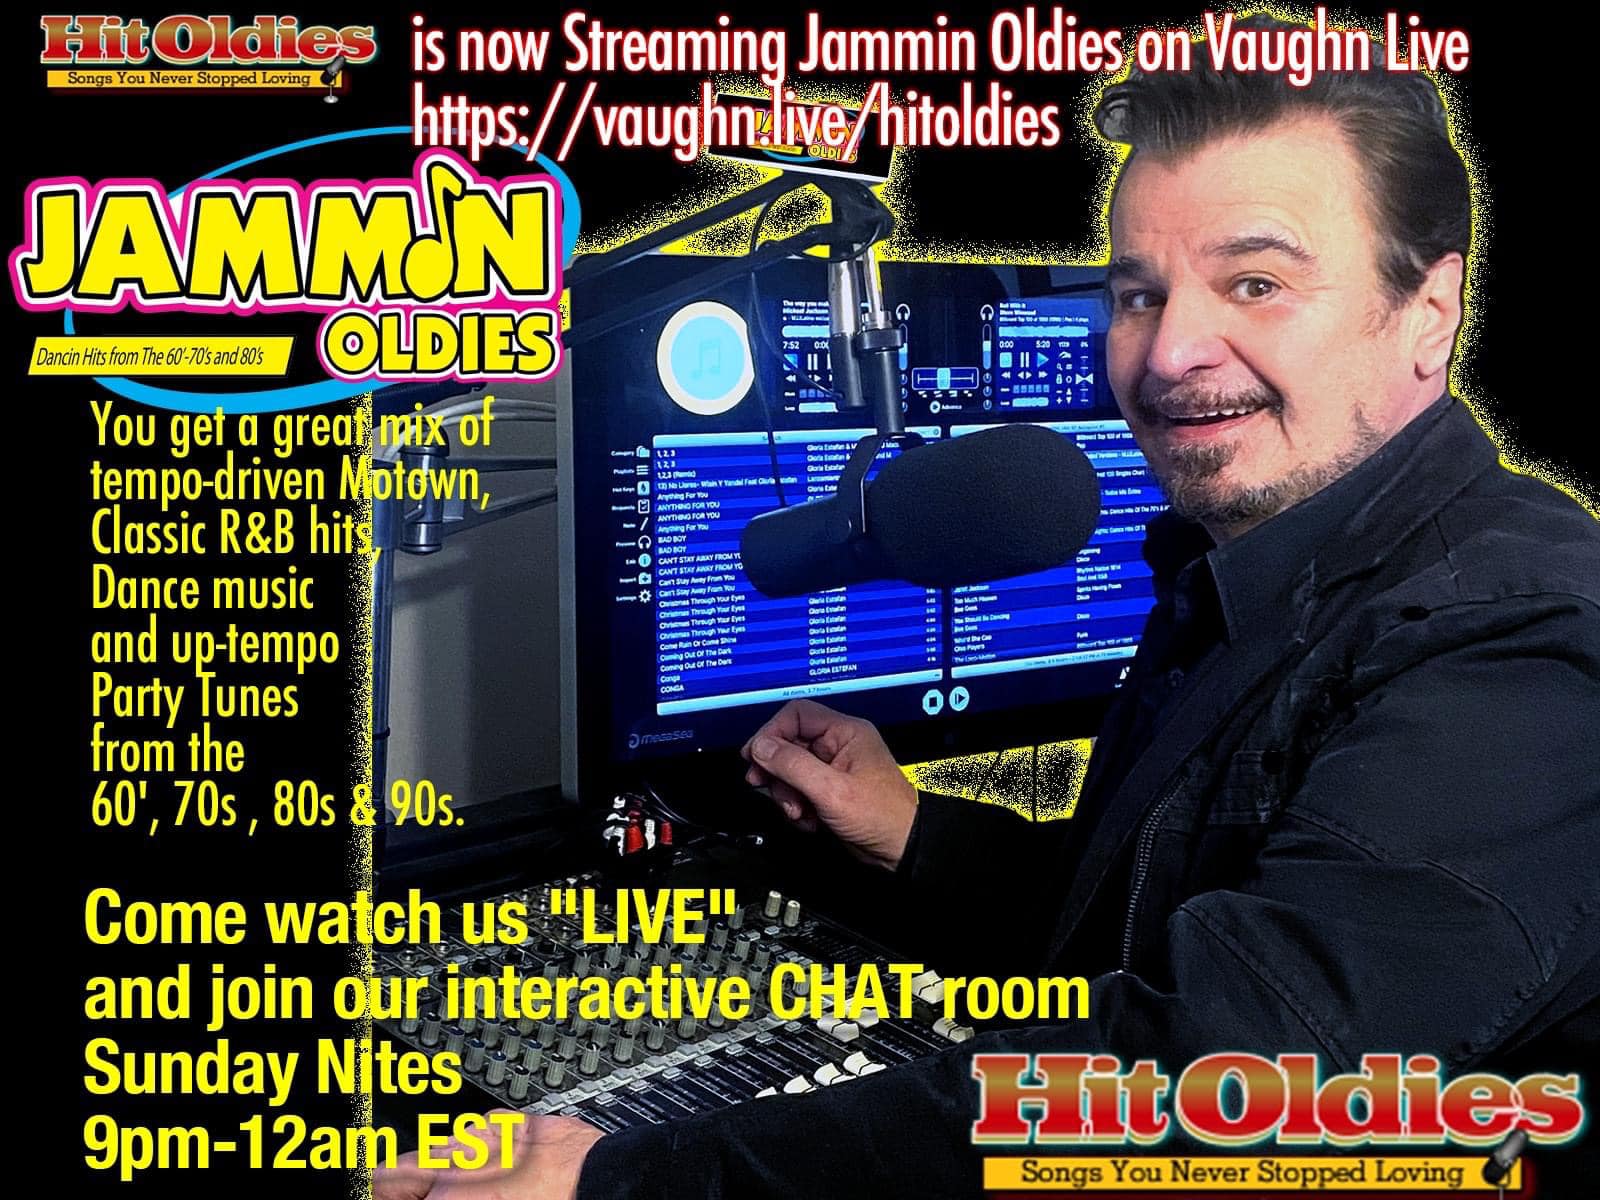 Check out the All-New “Jammin’ Oldies” with The Real Mark James!